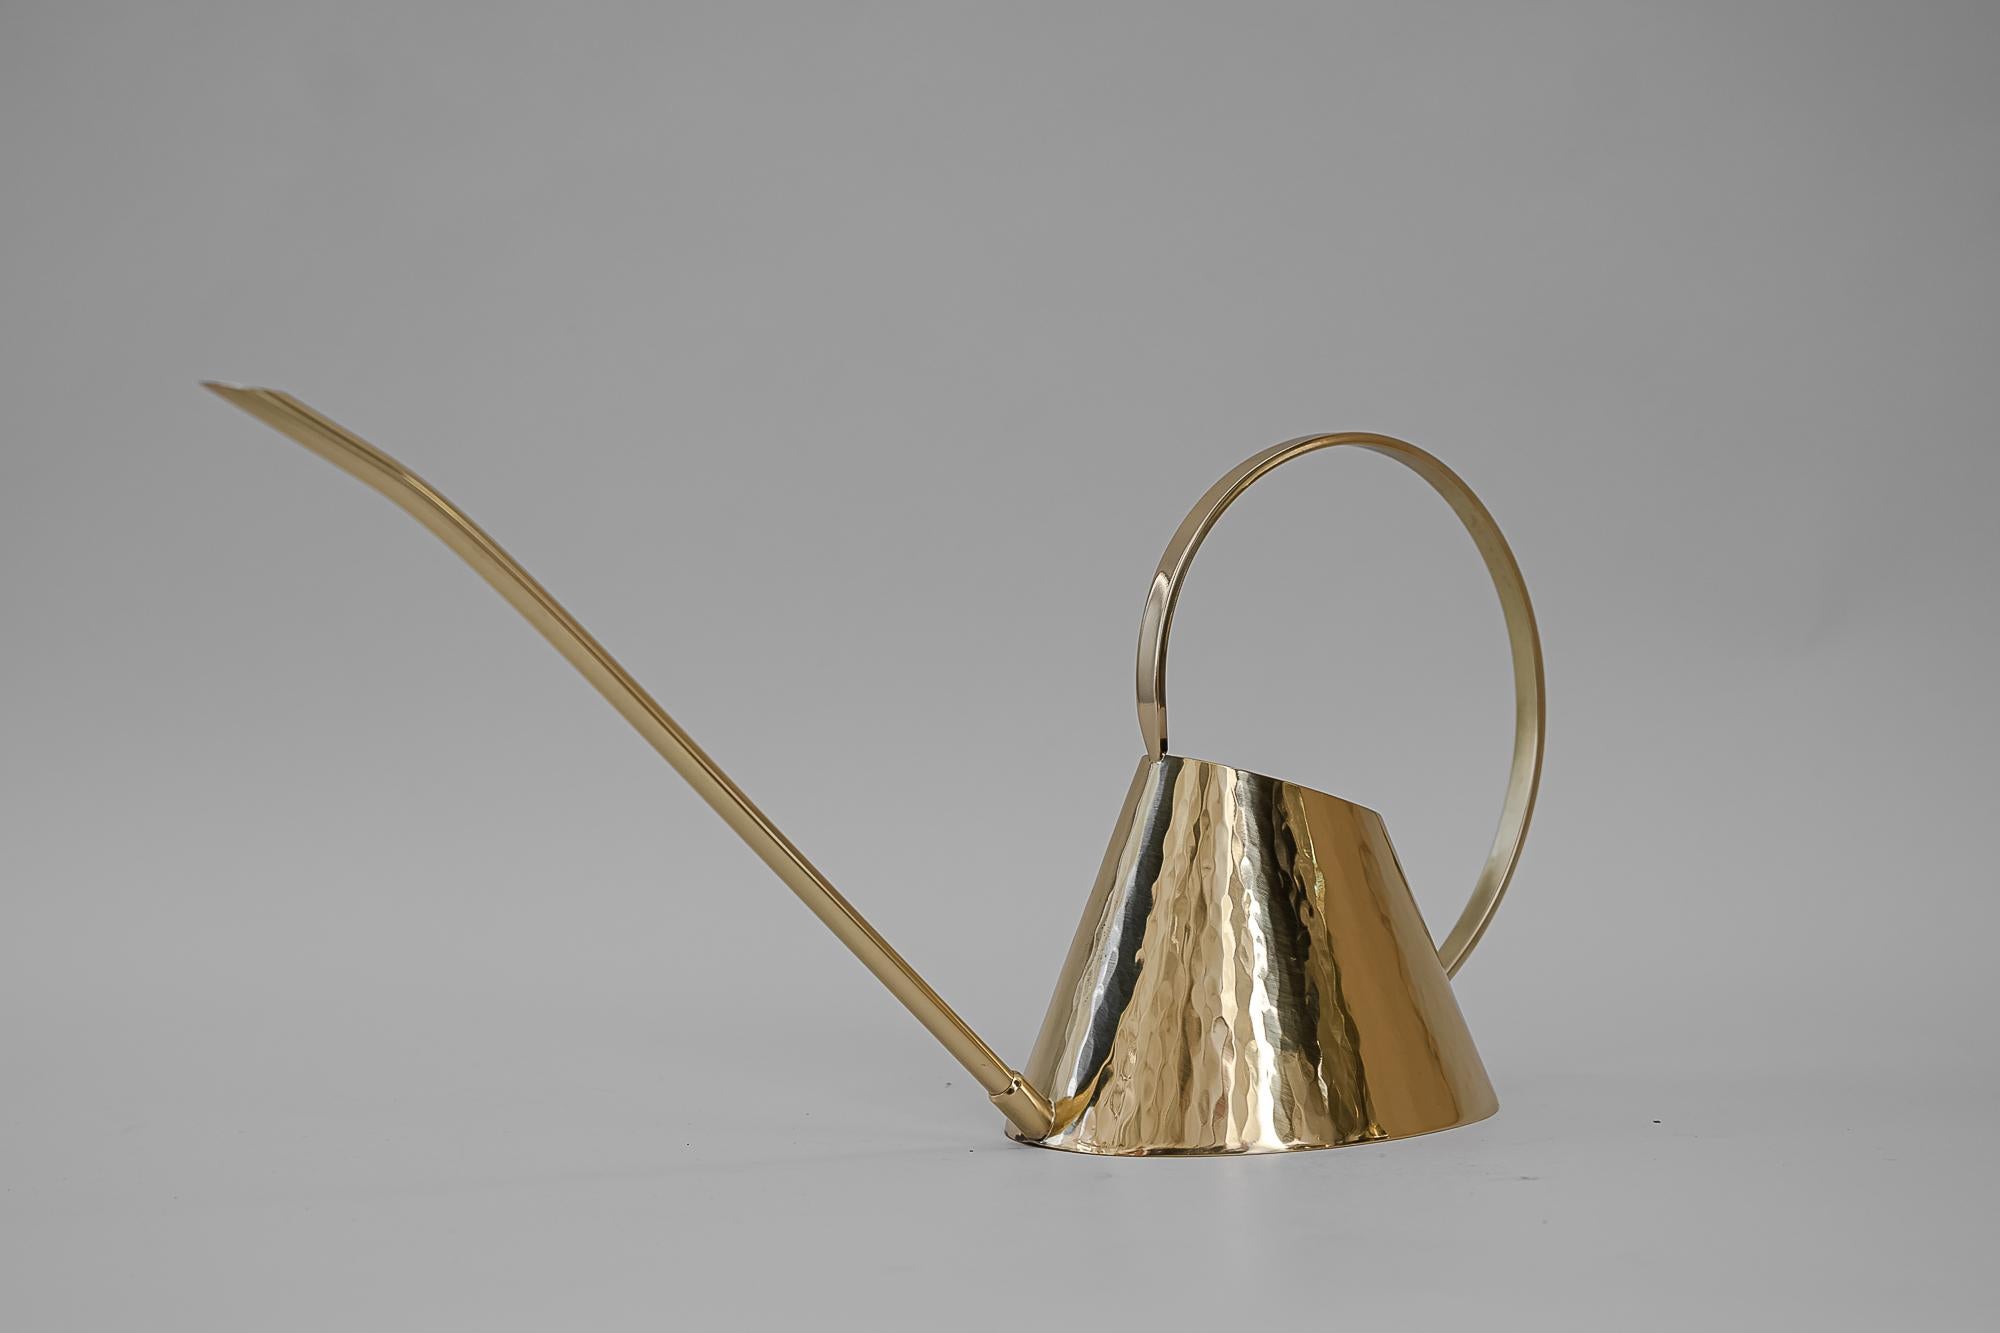 Hammered watering can, circa 1950s
Polished and stove enameled.